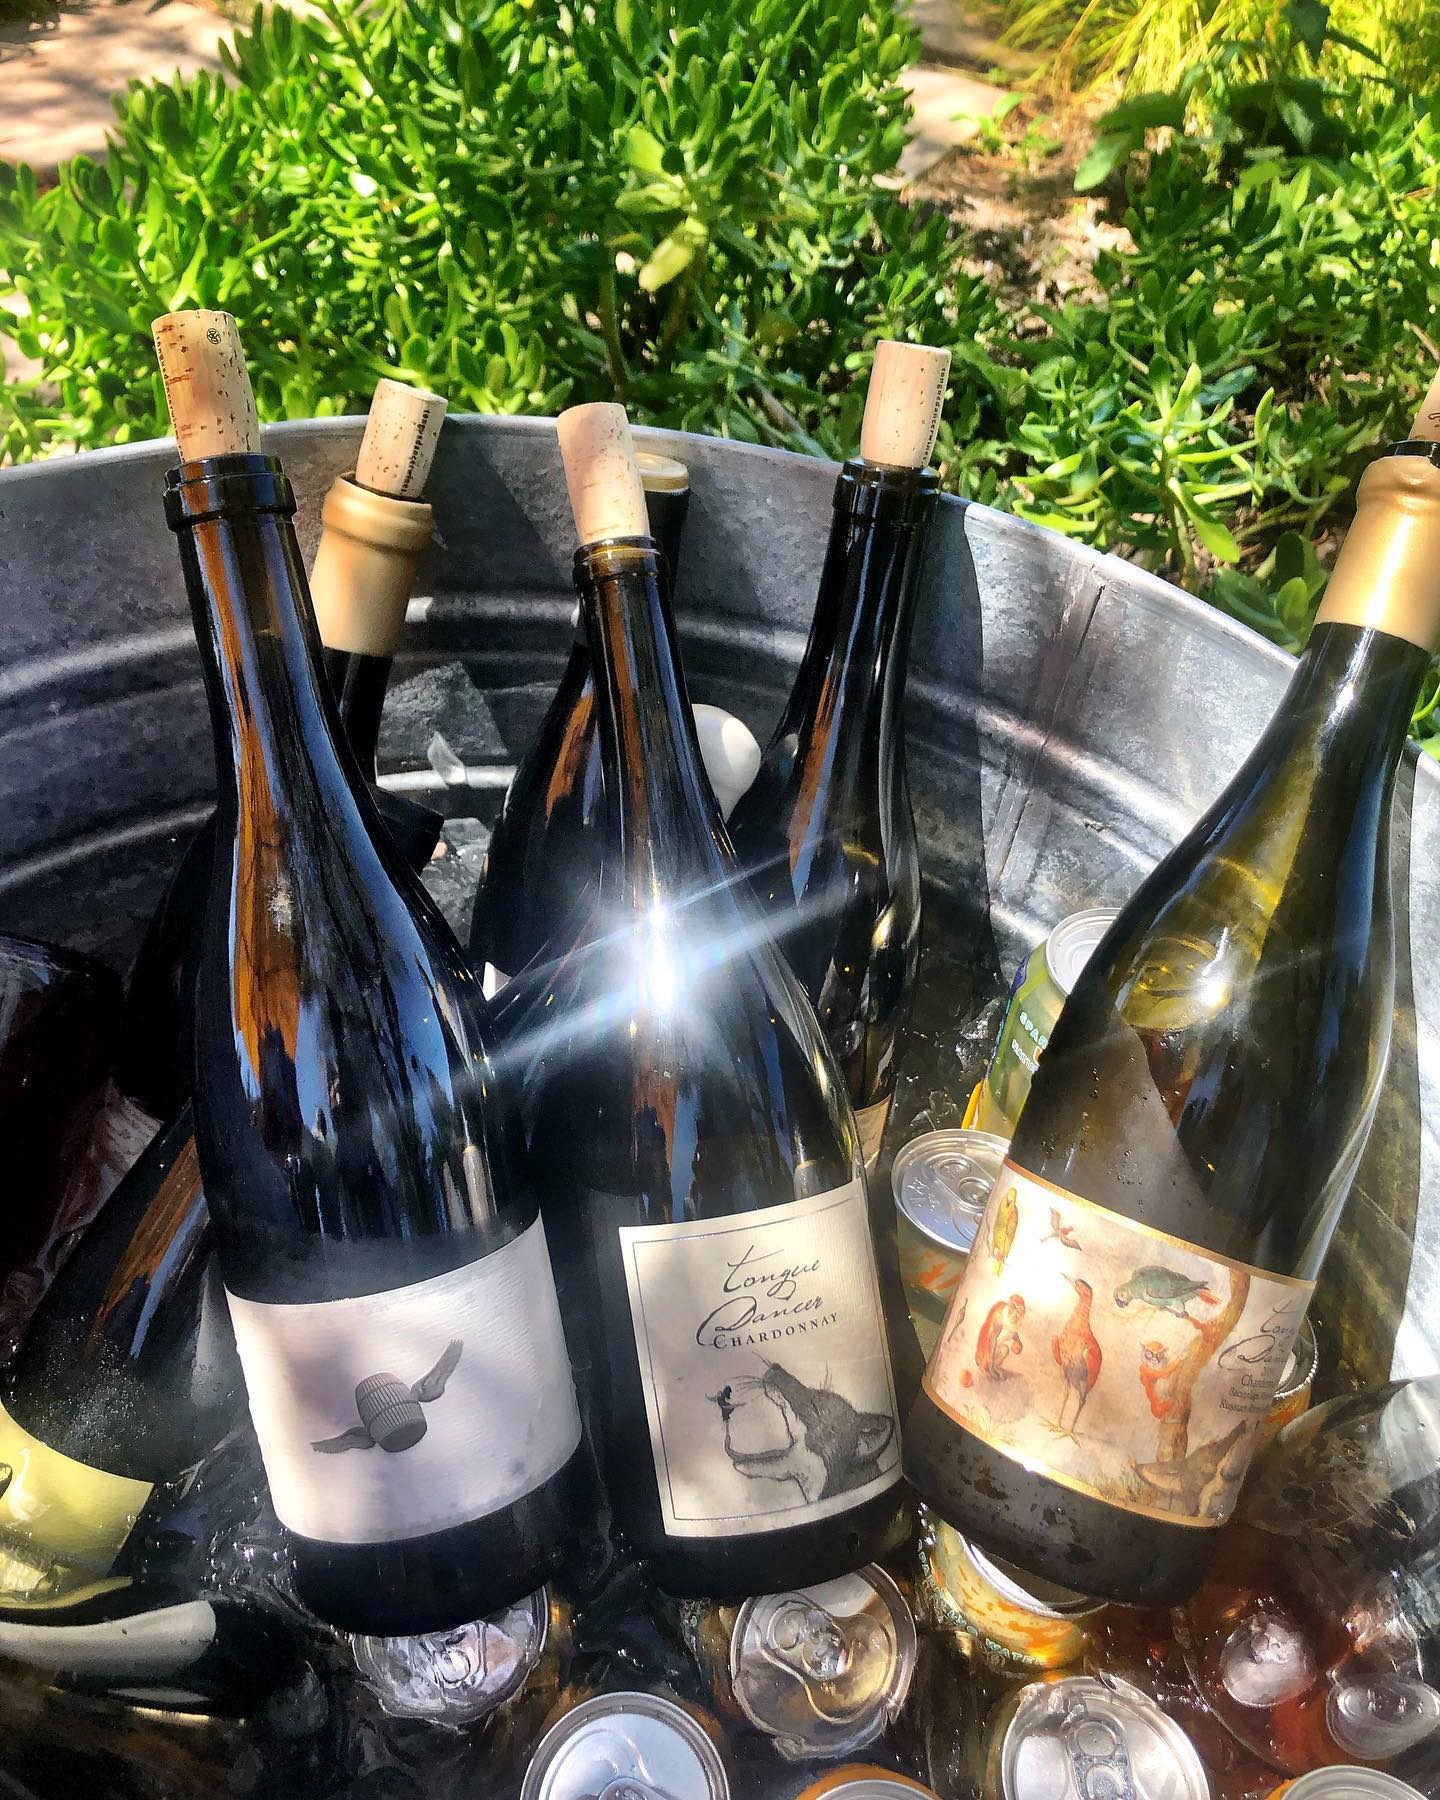 Several bottles of wine sitting in an ice barrel